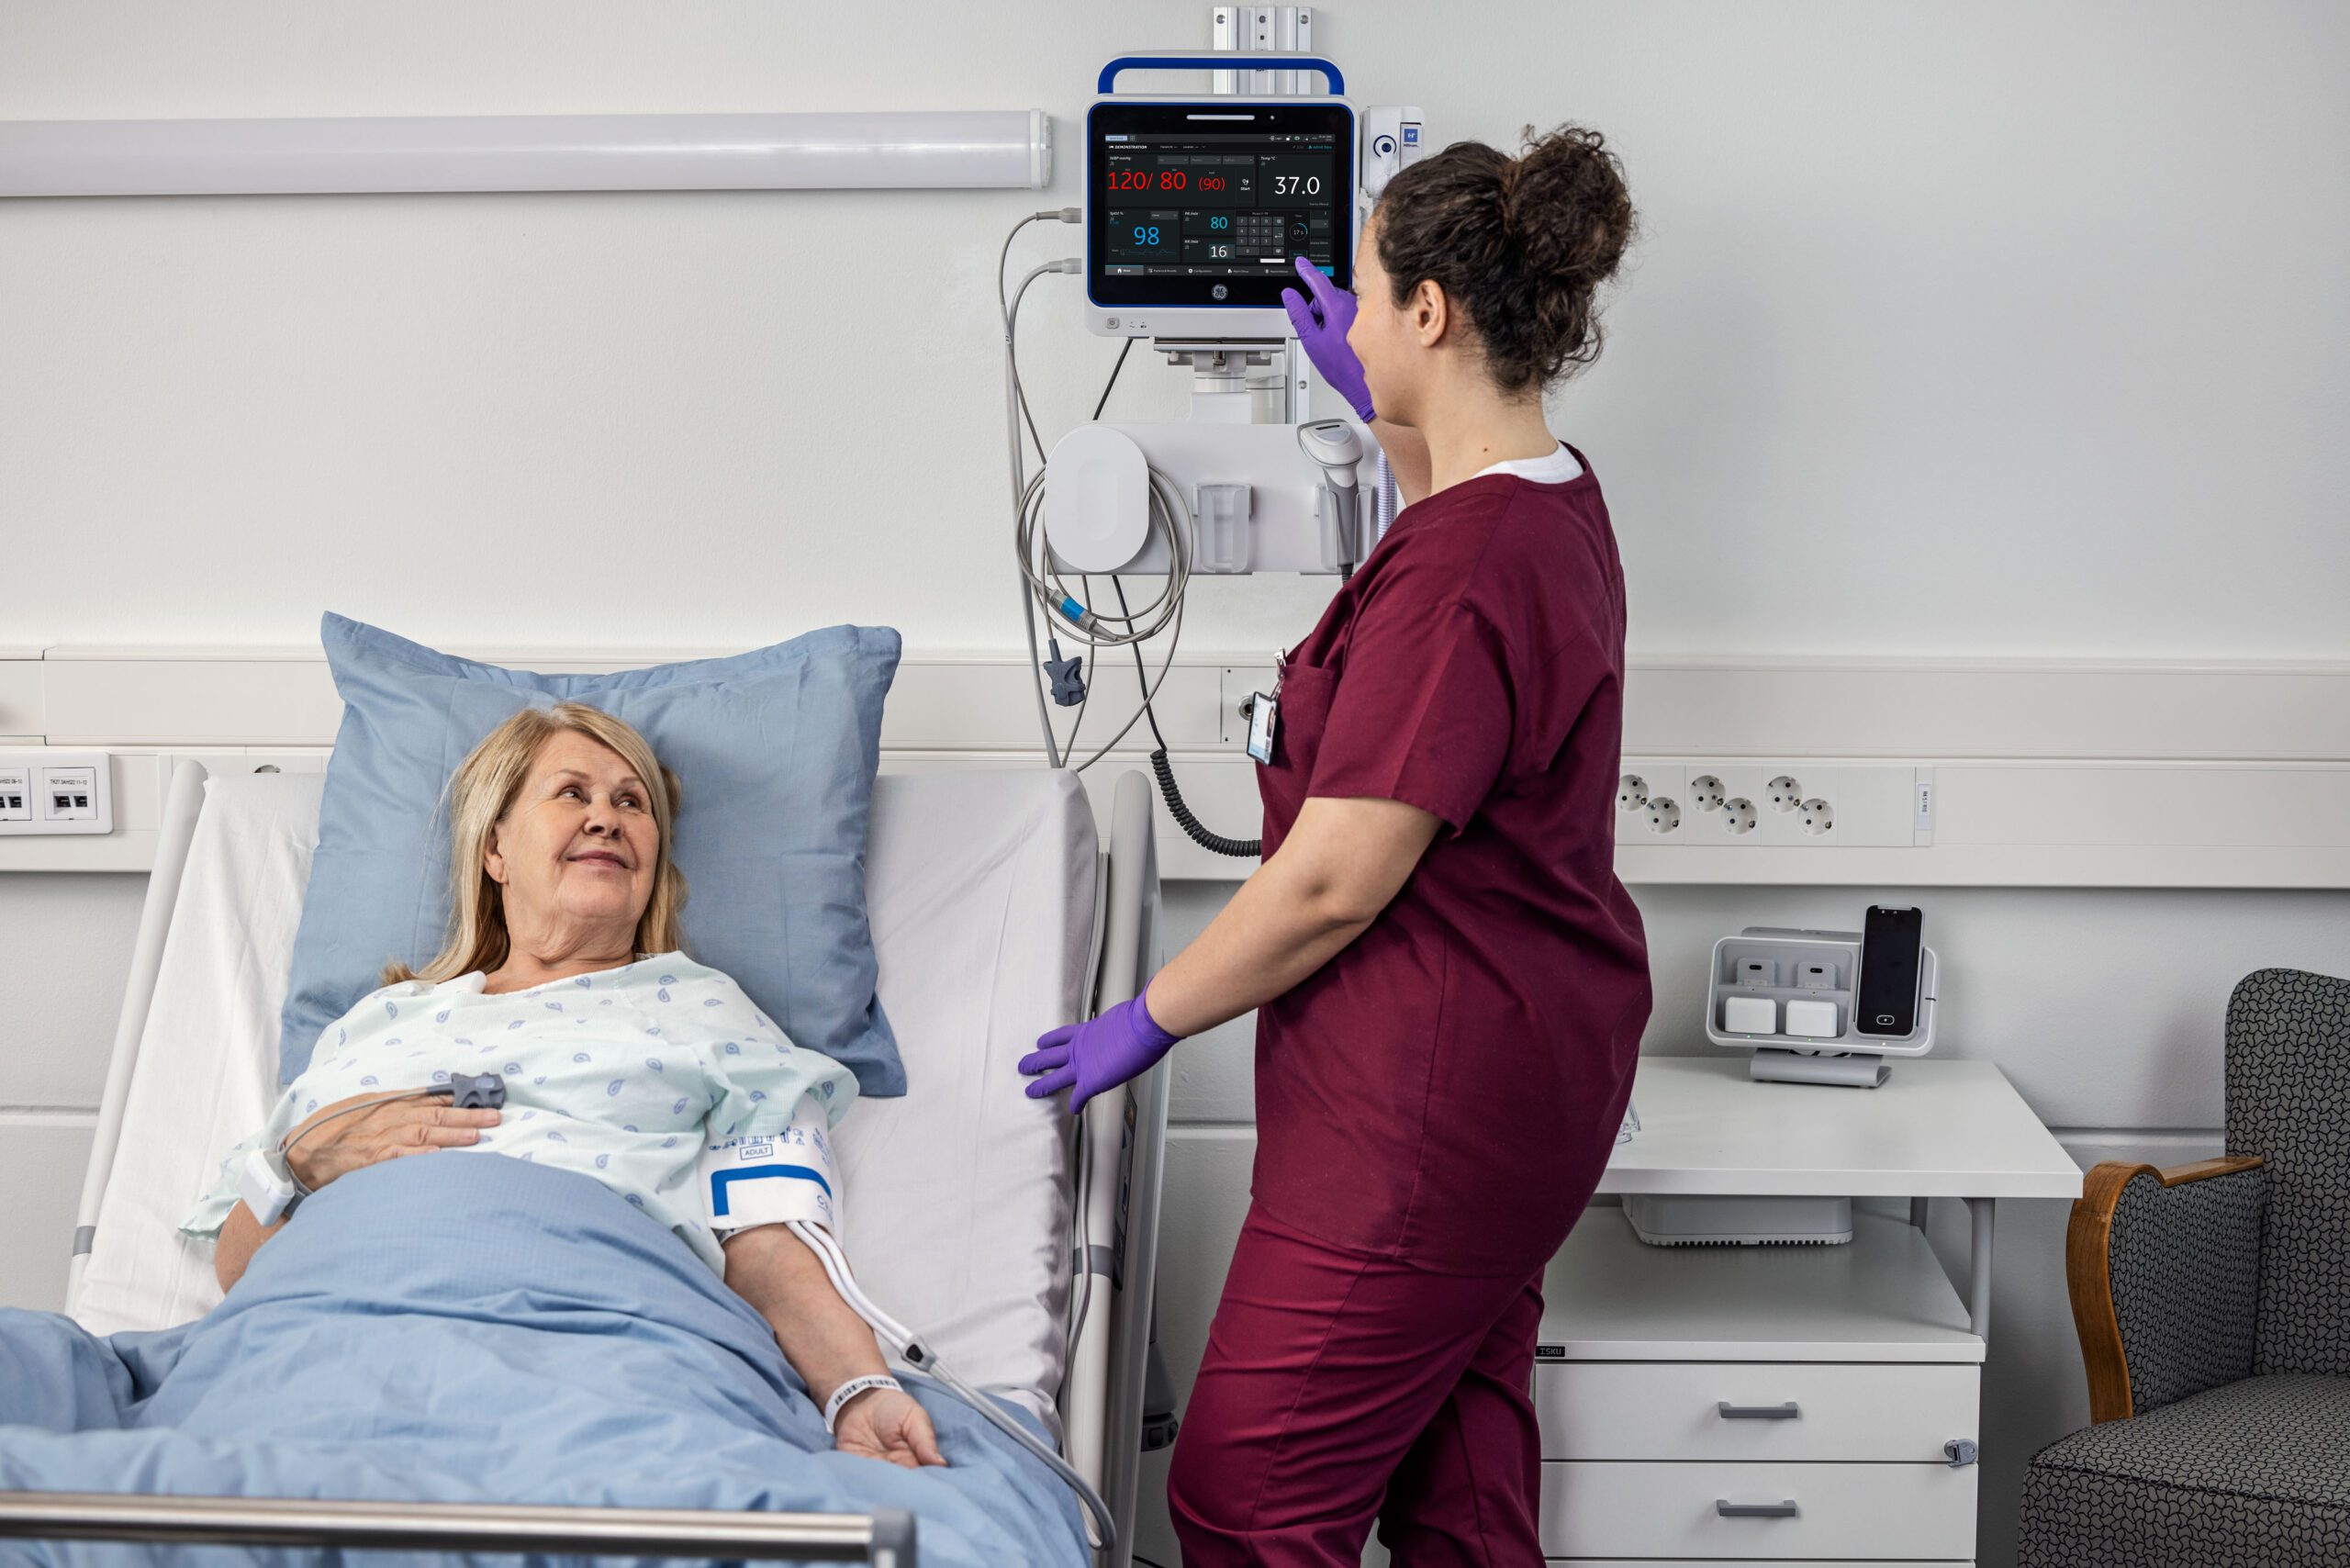 GE HealthCare's Portrait VSM Vital Signs Monitor Receives FDA Clearance